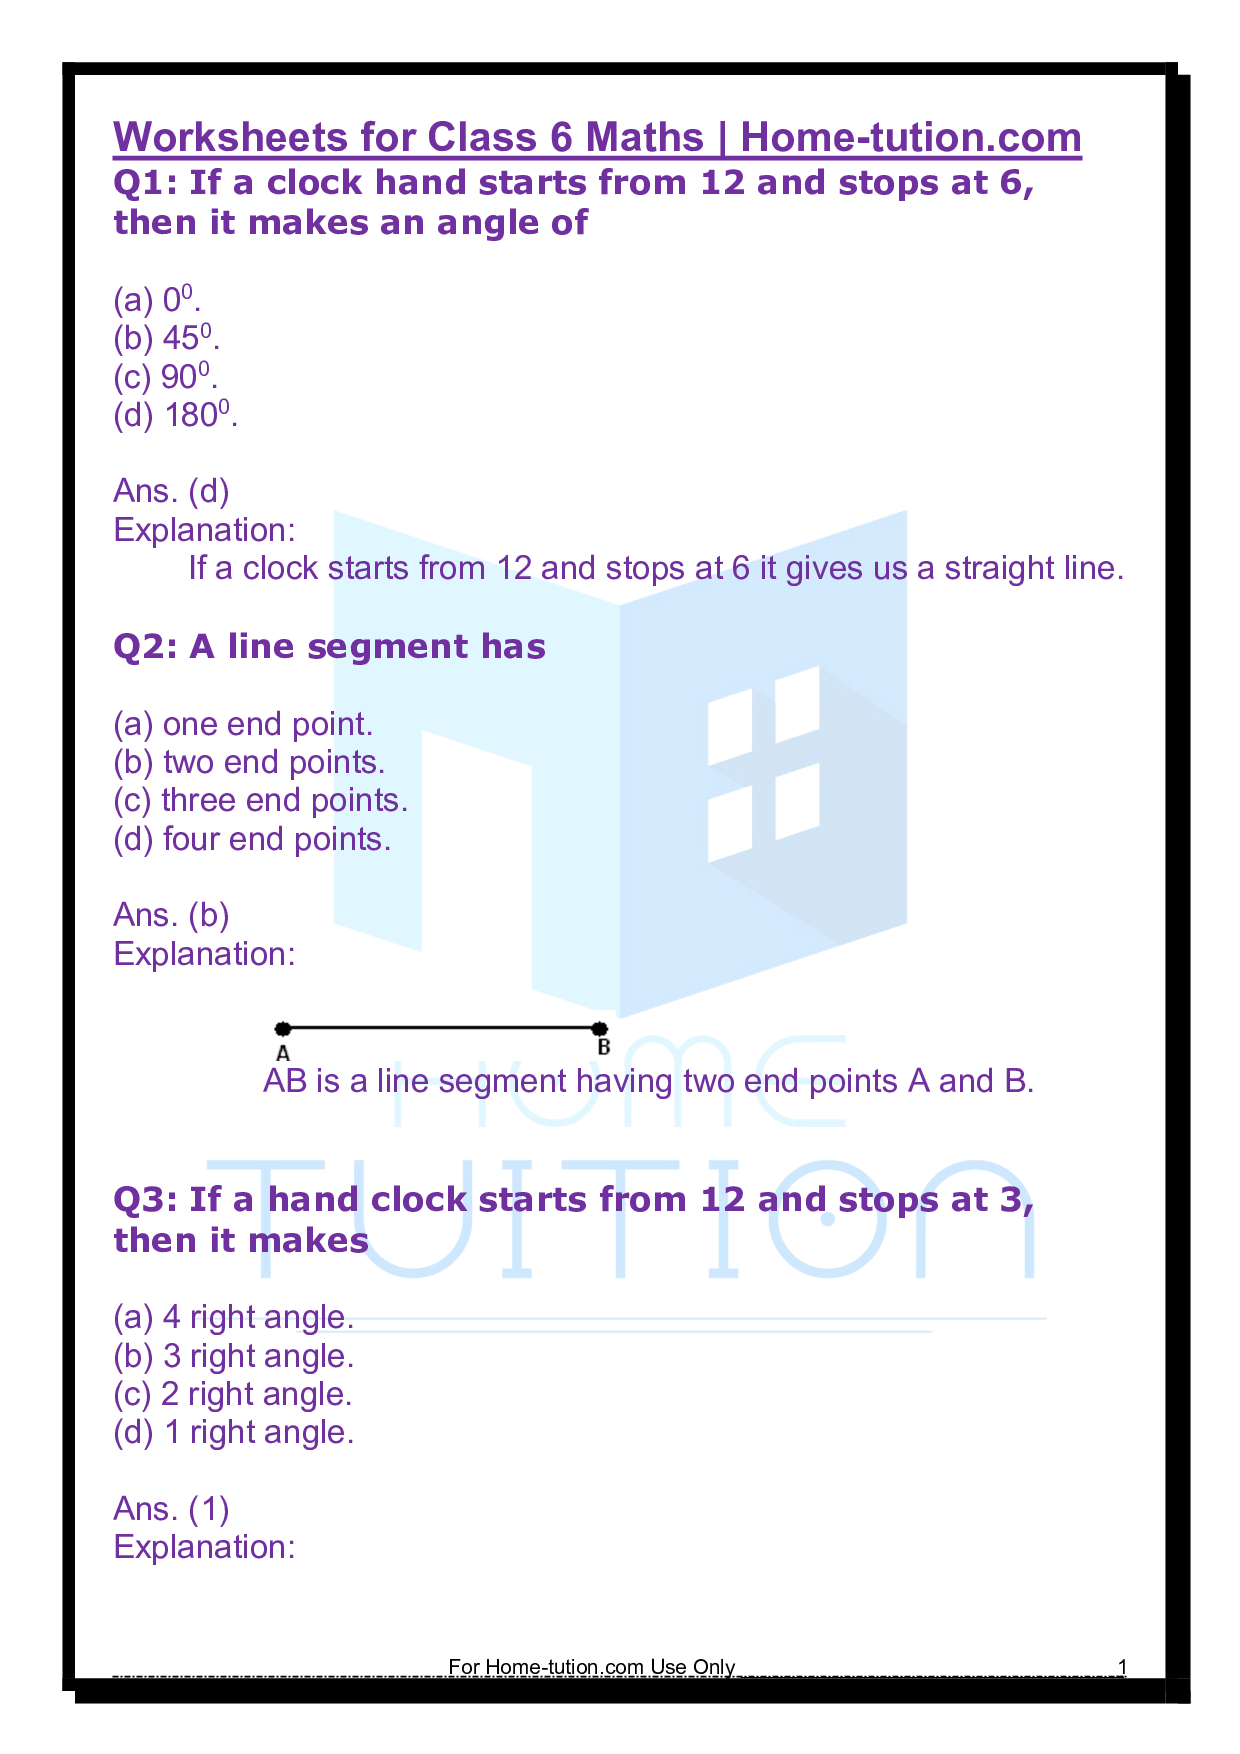 Questions for Chapter 5 Understanding Elementary Shapes